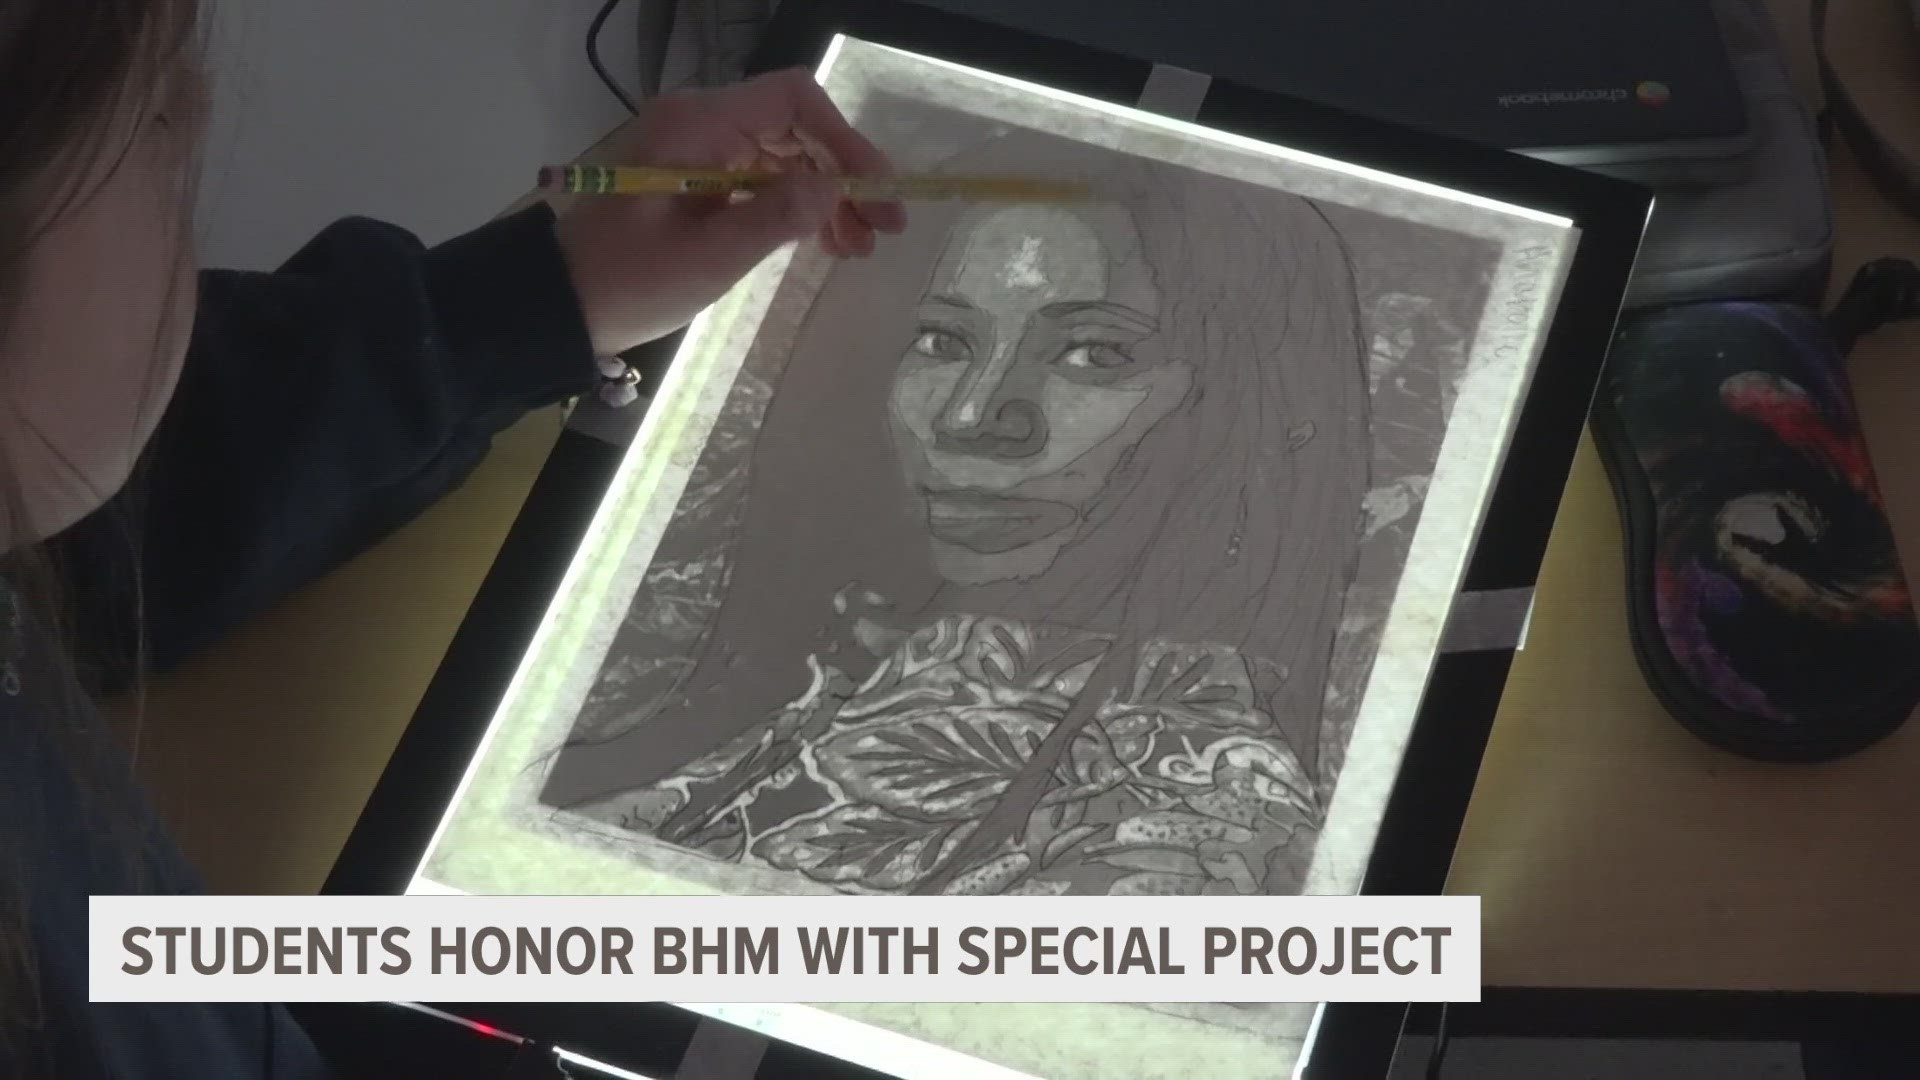 Students at West Michigan Academy of Environmental Science are honoring African American figures for Black History Month with a special art project.